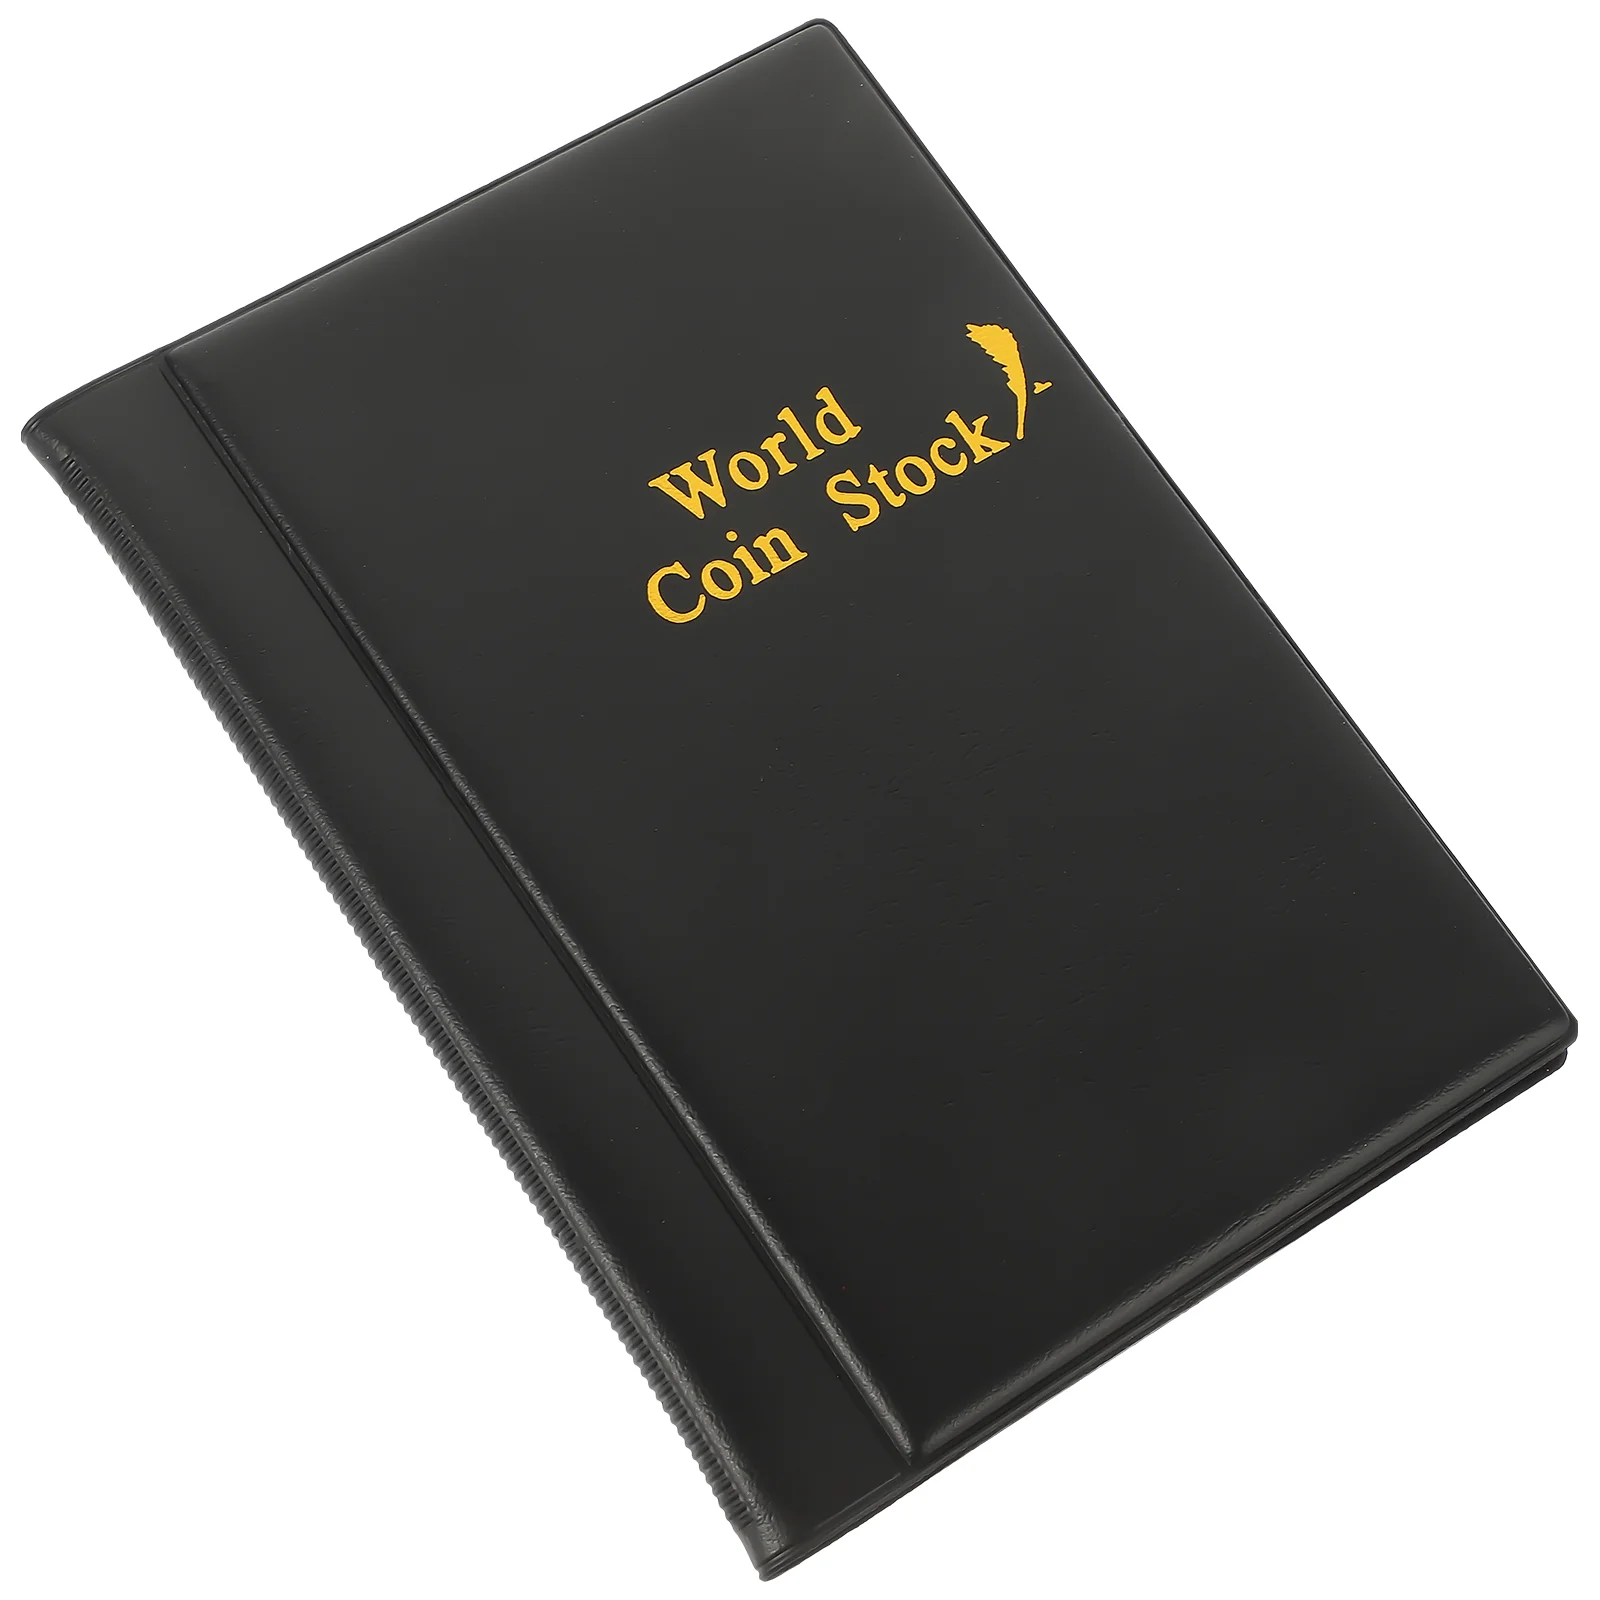 

Coin Collection Book Cases Books Stamp Commemorative Organizer Albums Coins for Pu Collectors Gift Holder Storage